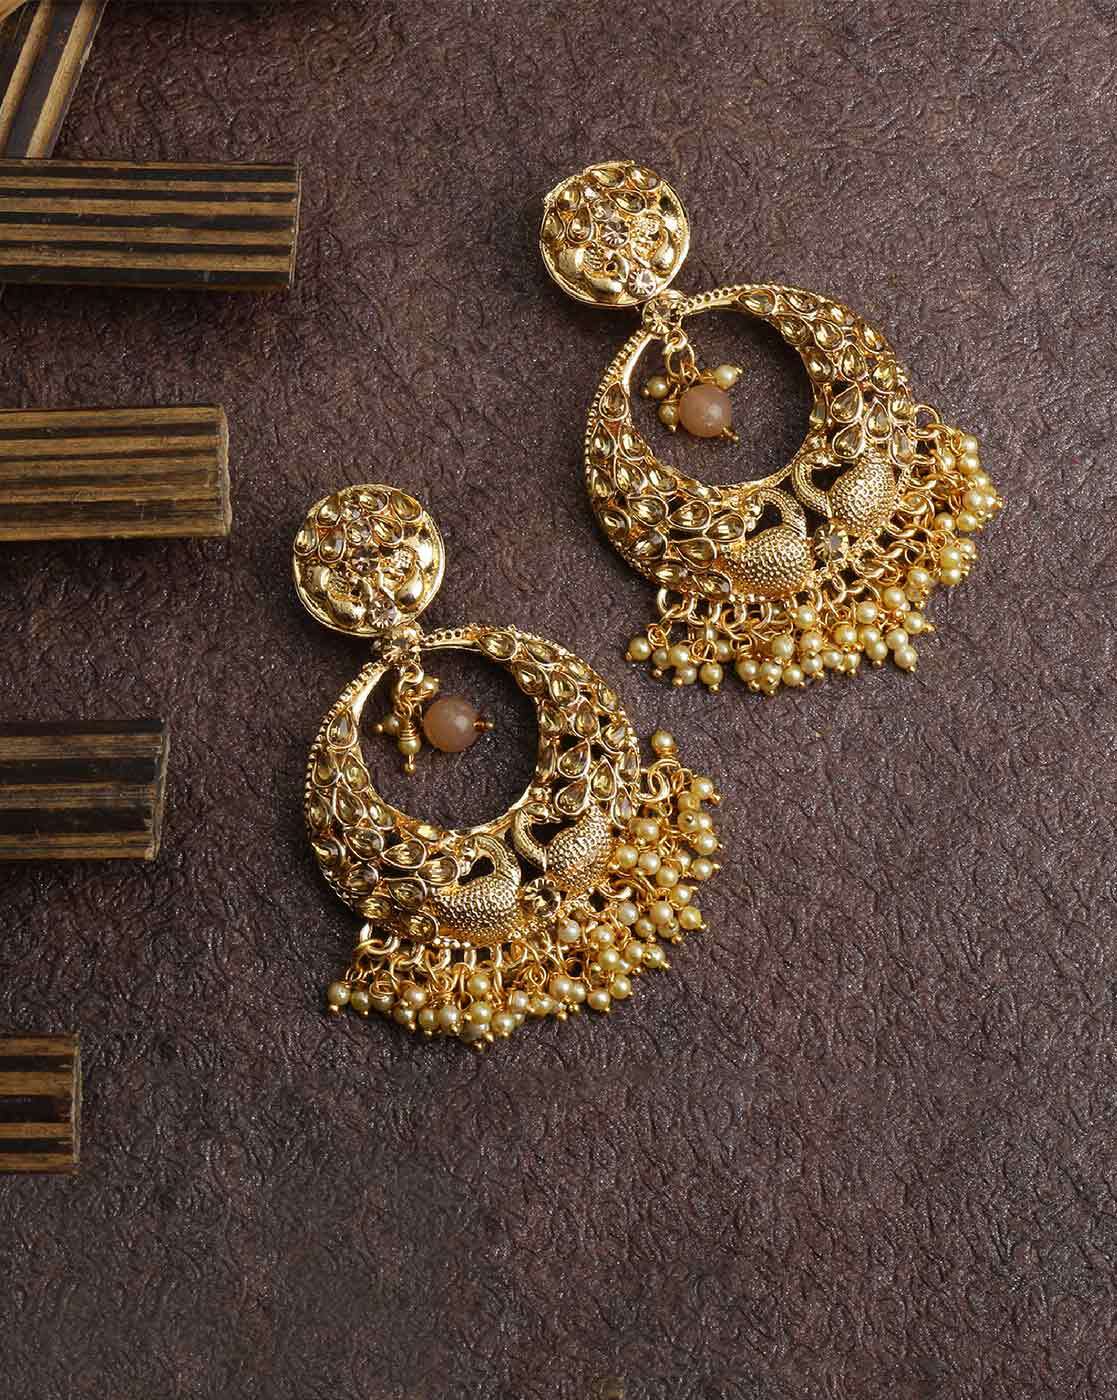 Jhumki Gold Fancy Earrings Size 1 Inches To 15 Inches Plus